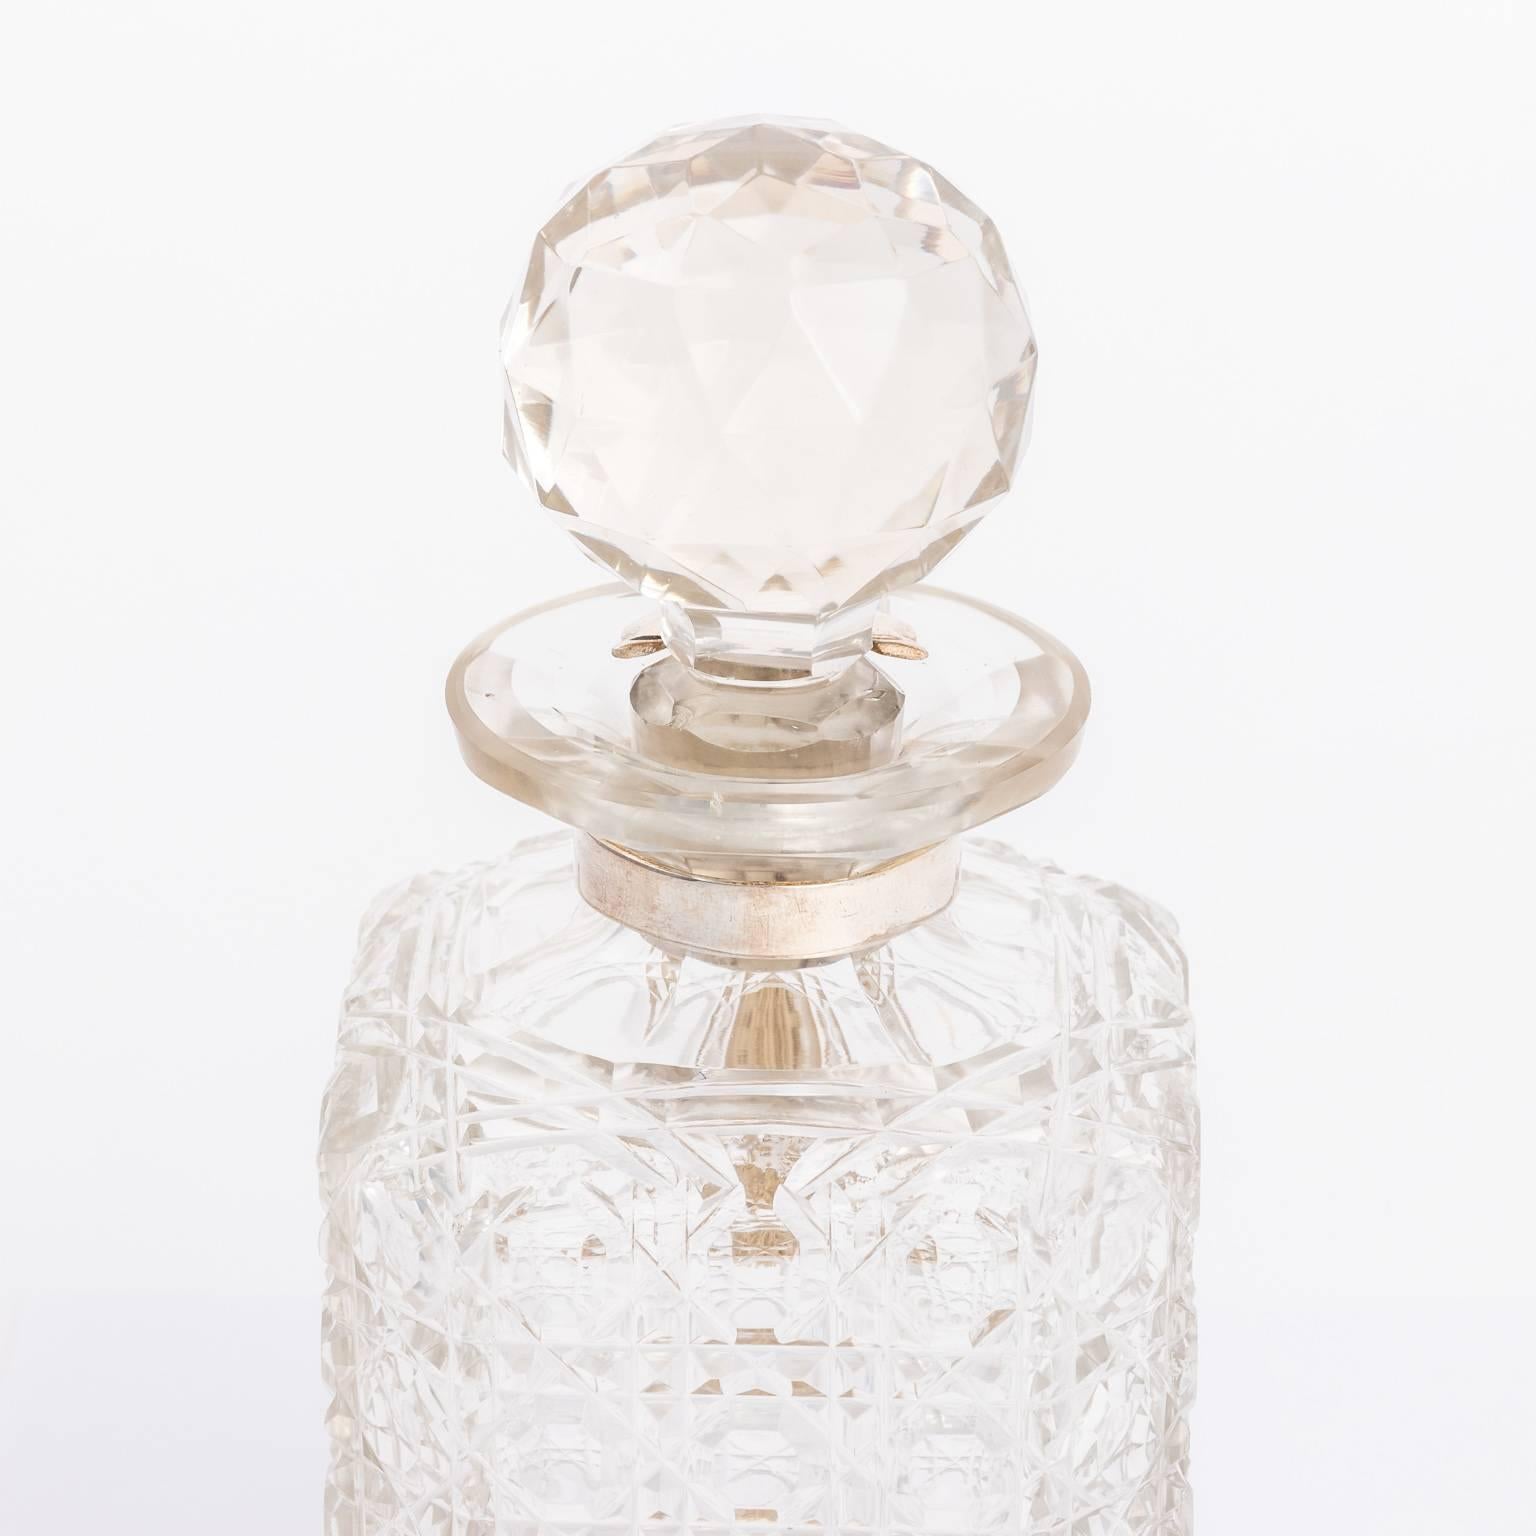 Circa 1910 English decanter with working lock in a cut crystal finish.